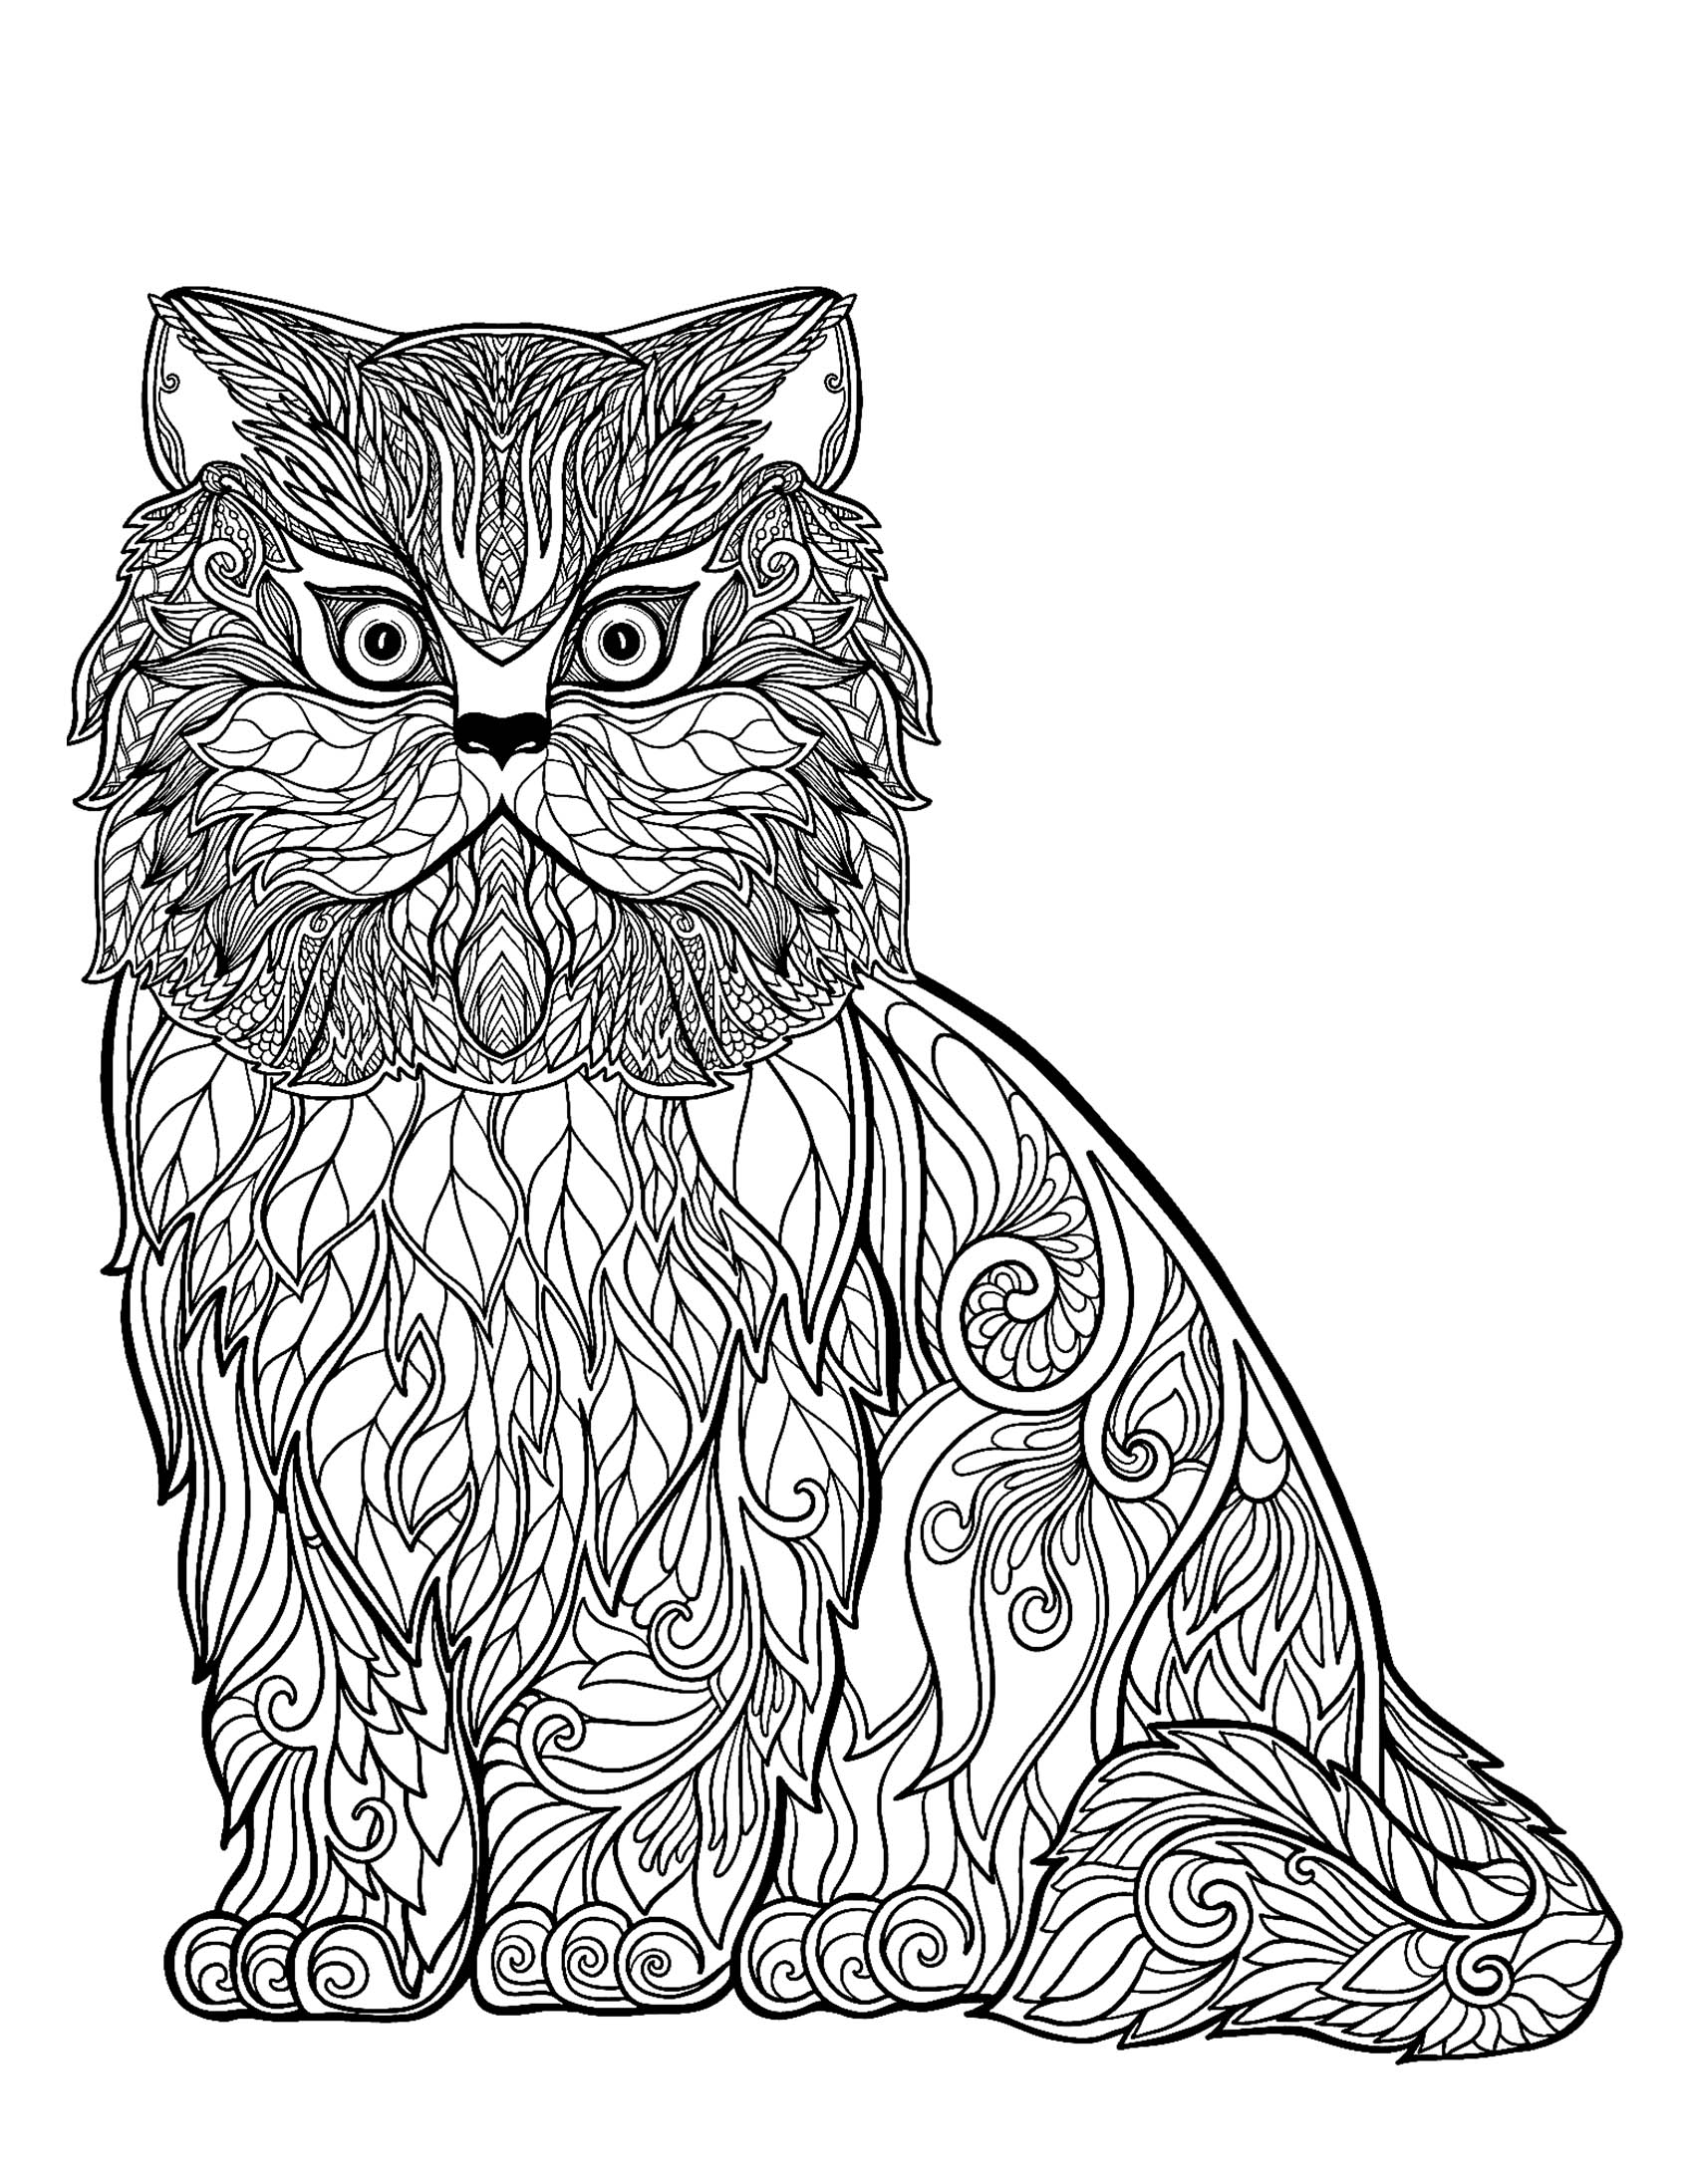 Cat free to color for kids Wise cat full of details